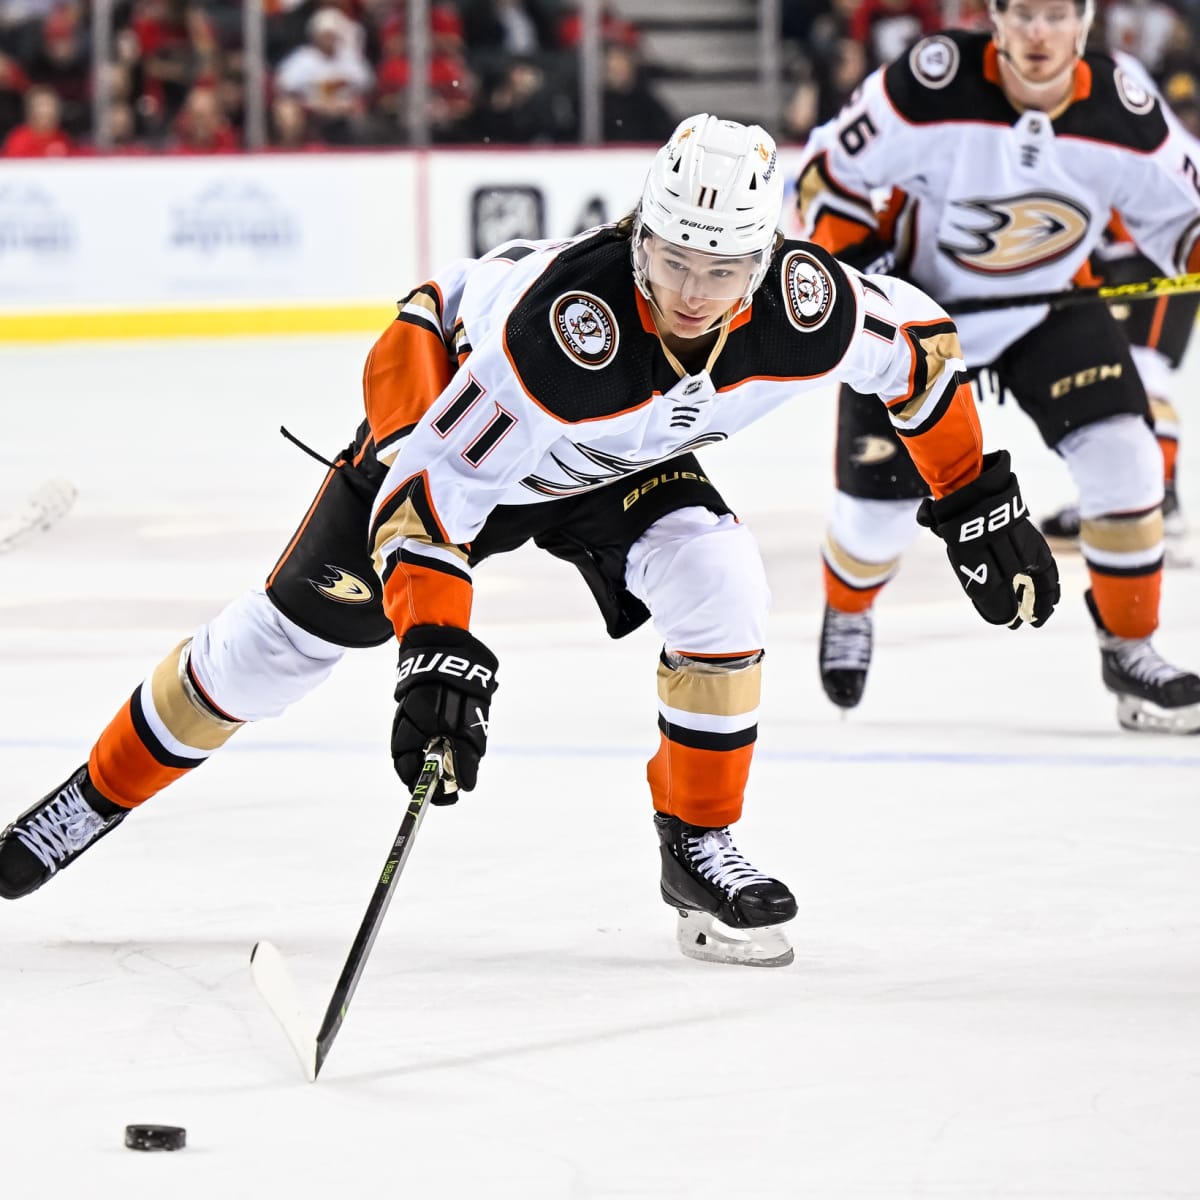 Anaheim Ducks: Troy Terry's New Contract Protects the Ducks